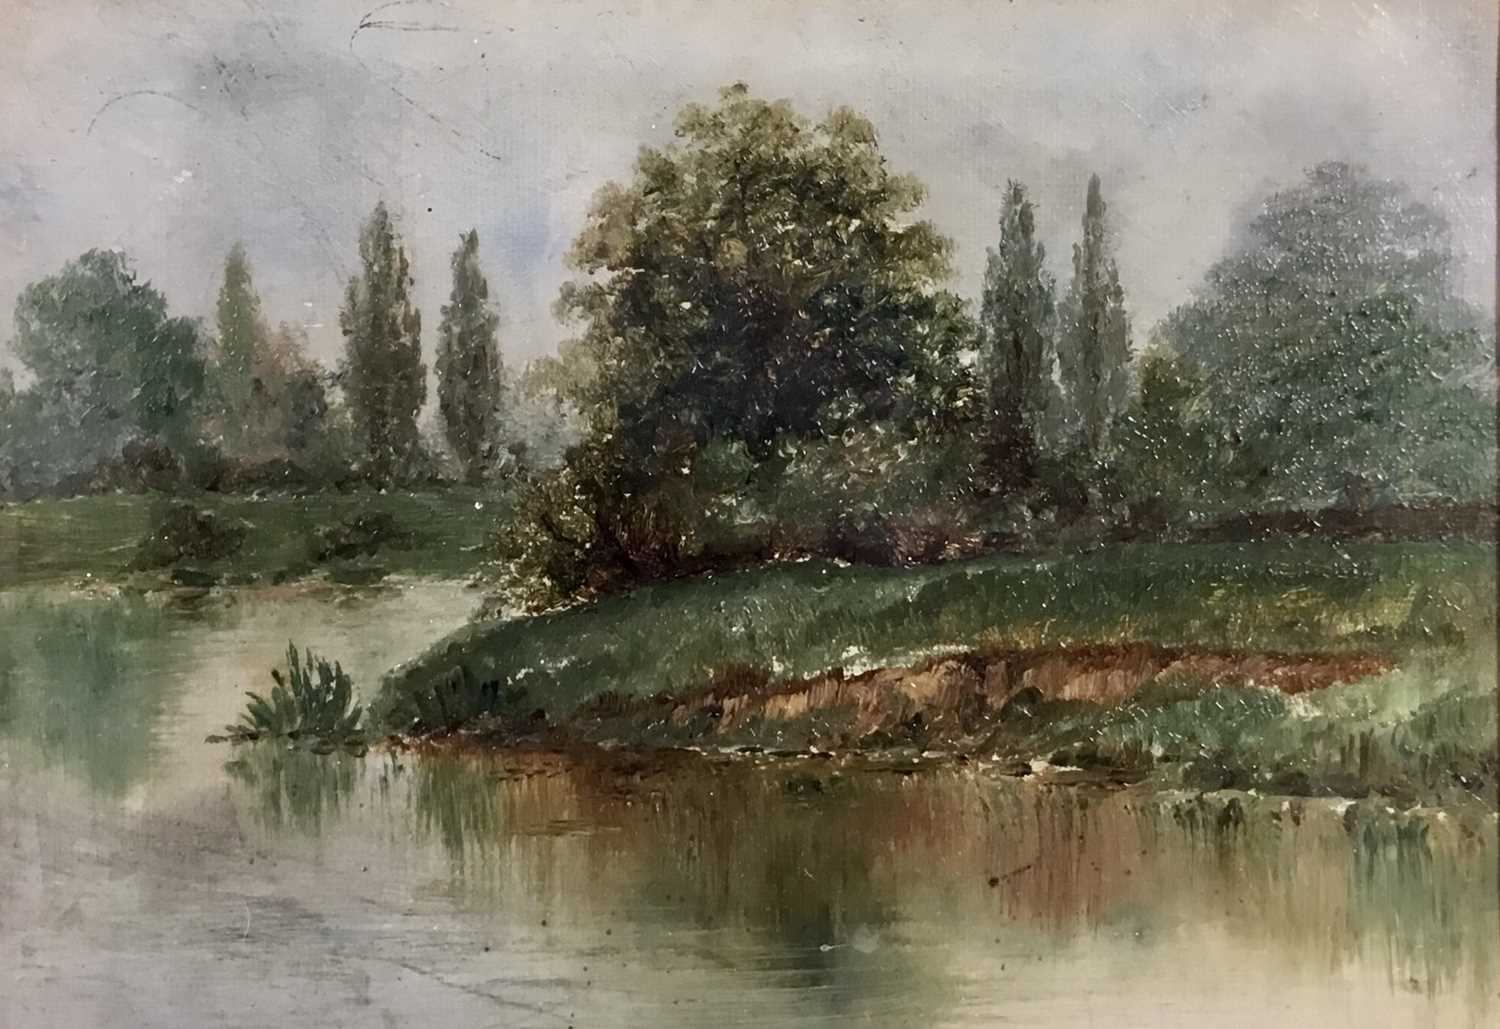 Lot 61 - Early 20th century English School oil on board, river landscape. Mounted and framed